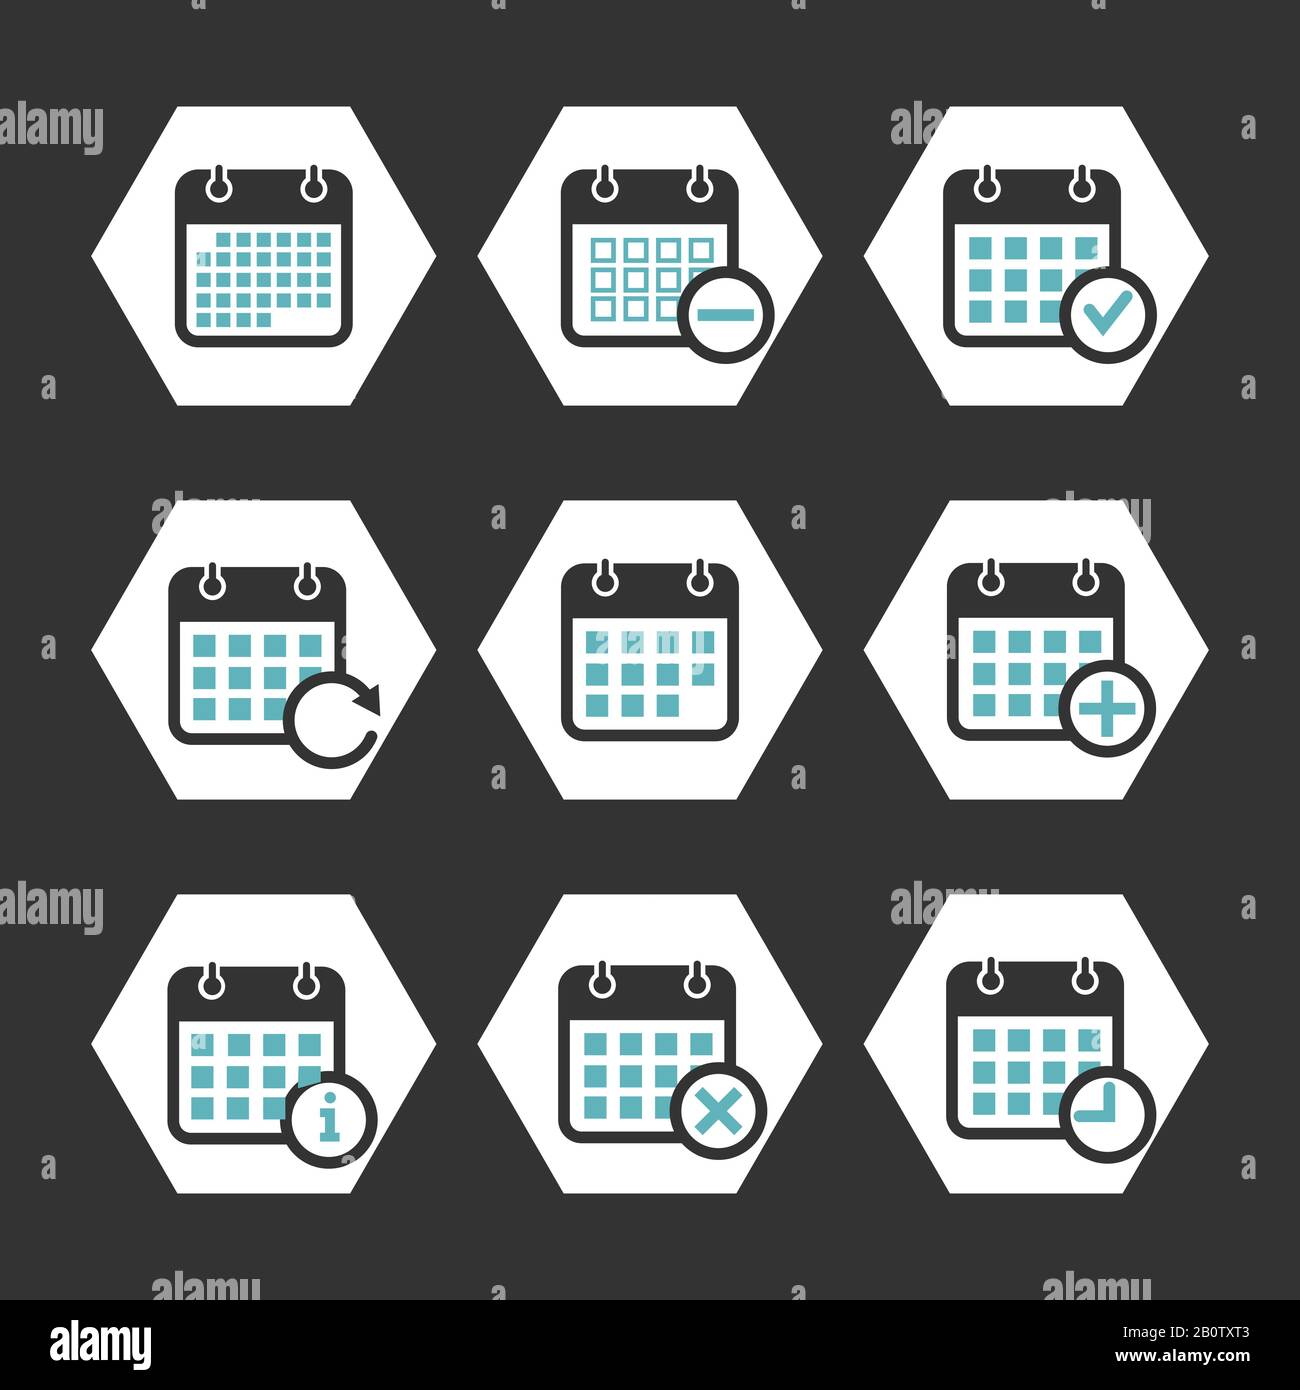 Calendar vector icons with event, progress and other symbols. Collection of calendar icons illustration Stock Vector